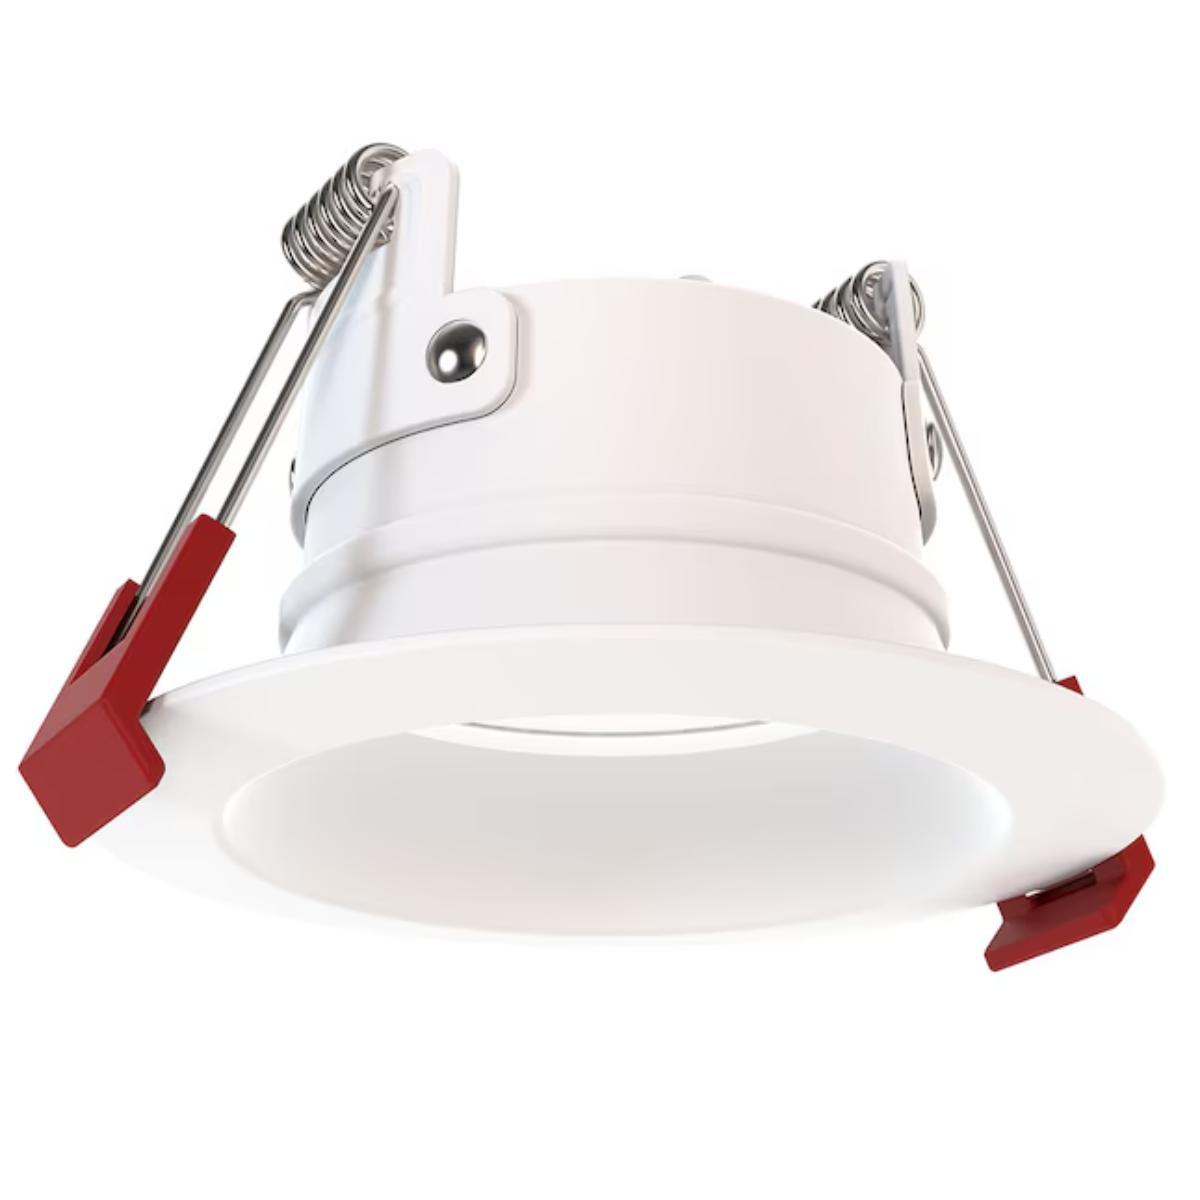 2 inch Wafer Canless LED Recessed Light, 10 Watt, Adjustable 544/725/907 Lumens, Selectable CCT, 2700K to 5000K, Smooth Trim